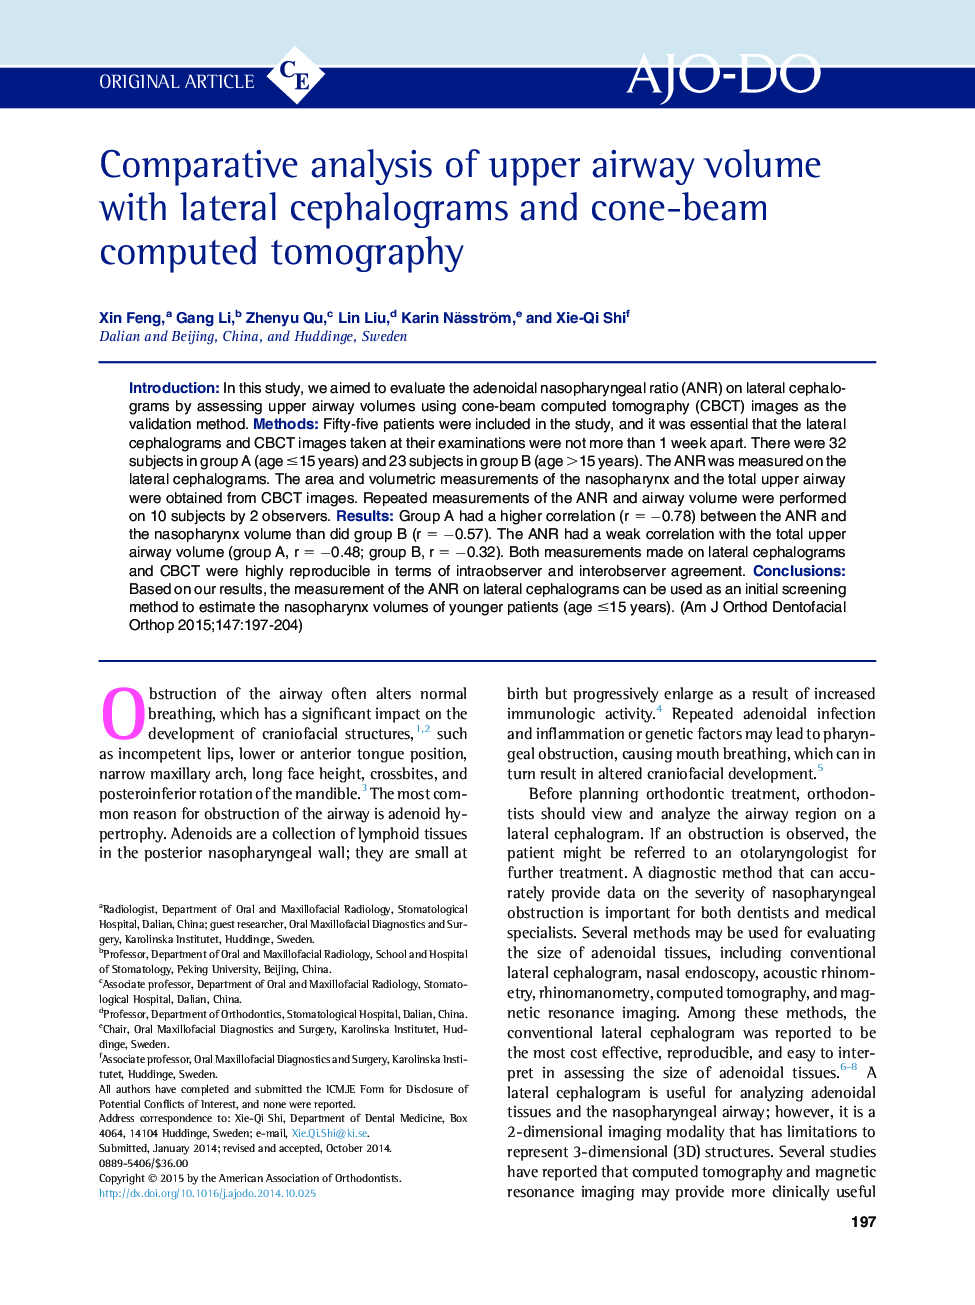 Comparative analysis of upper airway volume with lateral cephalograms and cone-beam computed tomography 